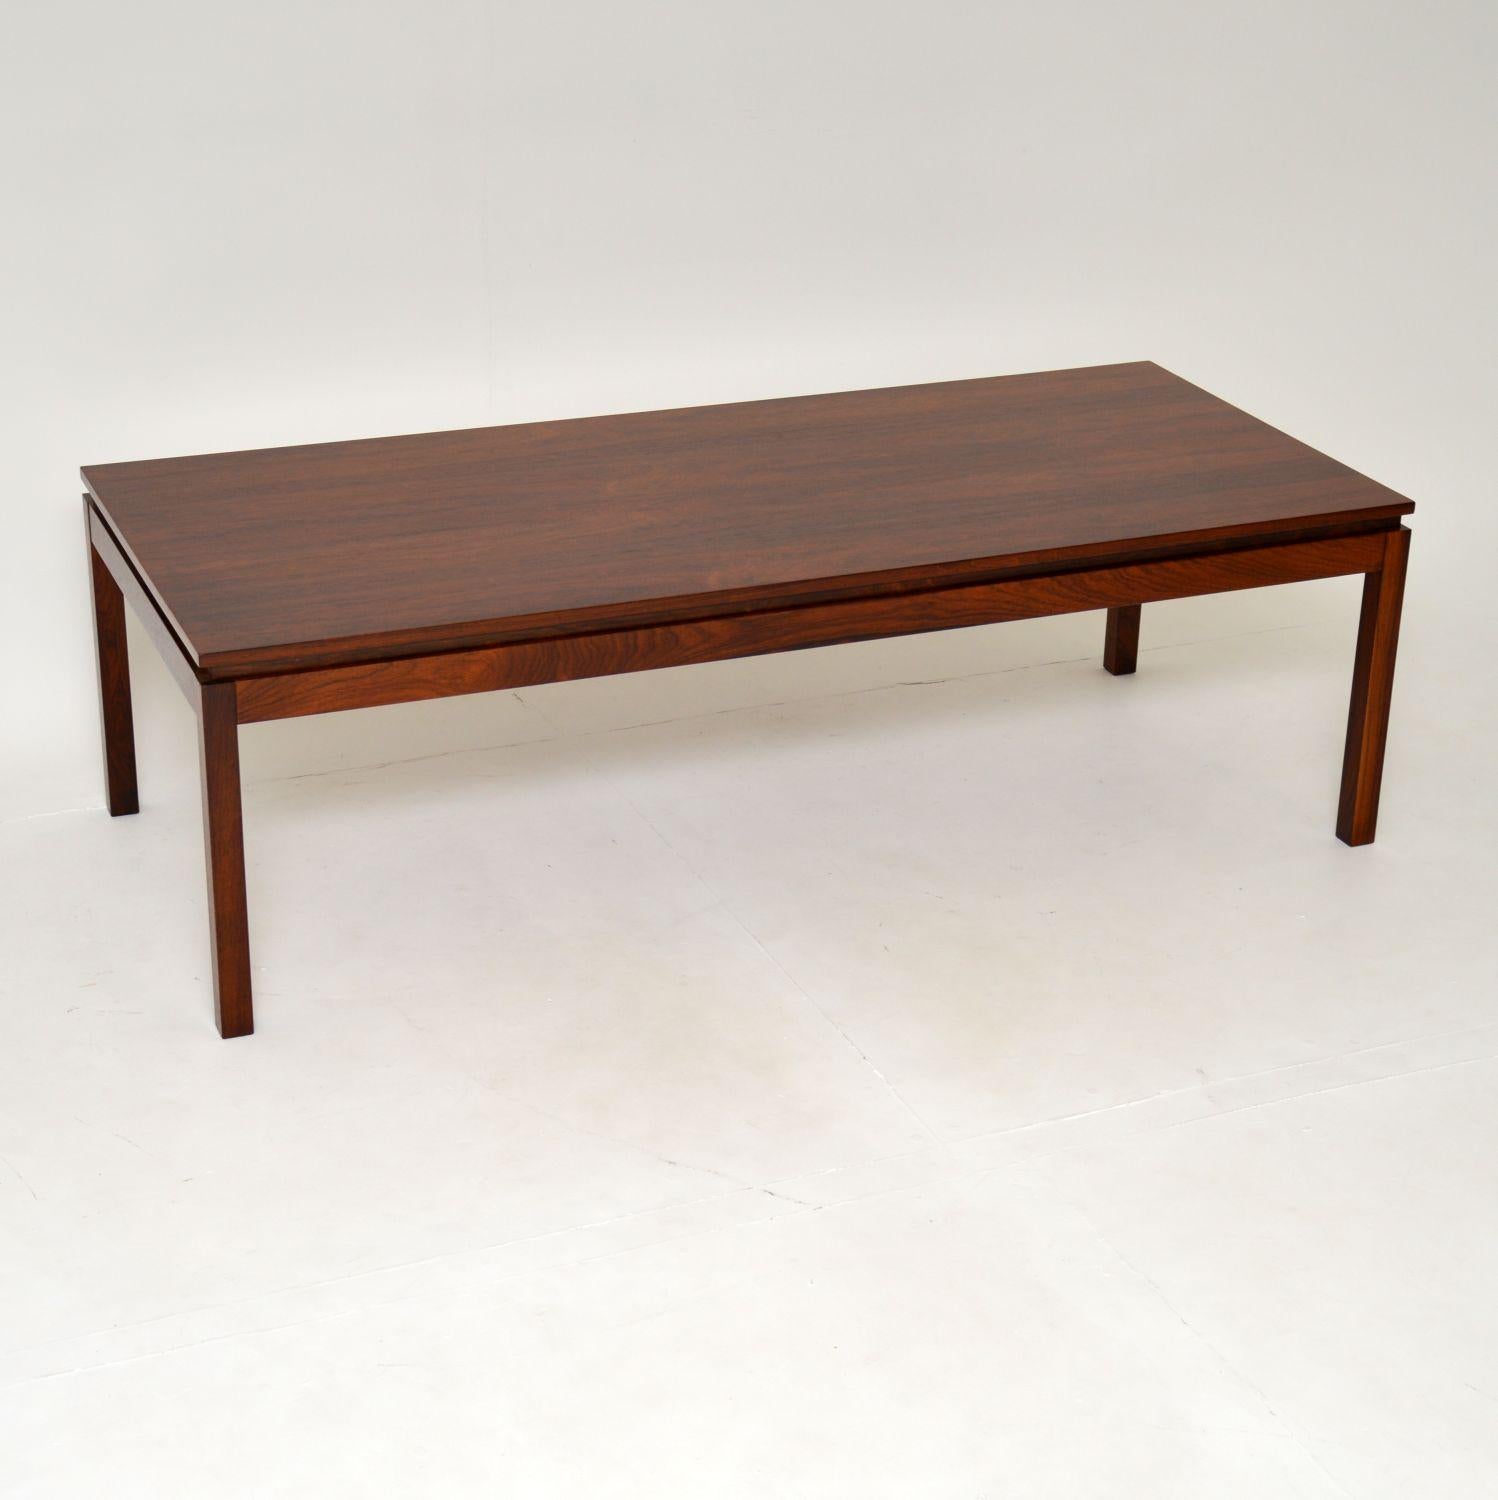 A very large and extremely well made vintage Danish coffee table. This was made in Denmark, it dates from the 1960’s.

The quality is fantastic, this is beautifully designed and has stunning wood grain patterns. The colour and patina are